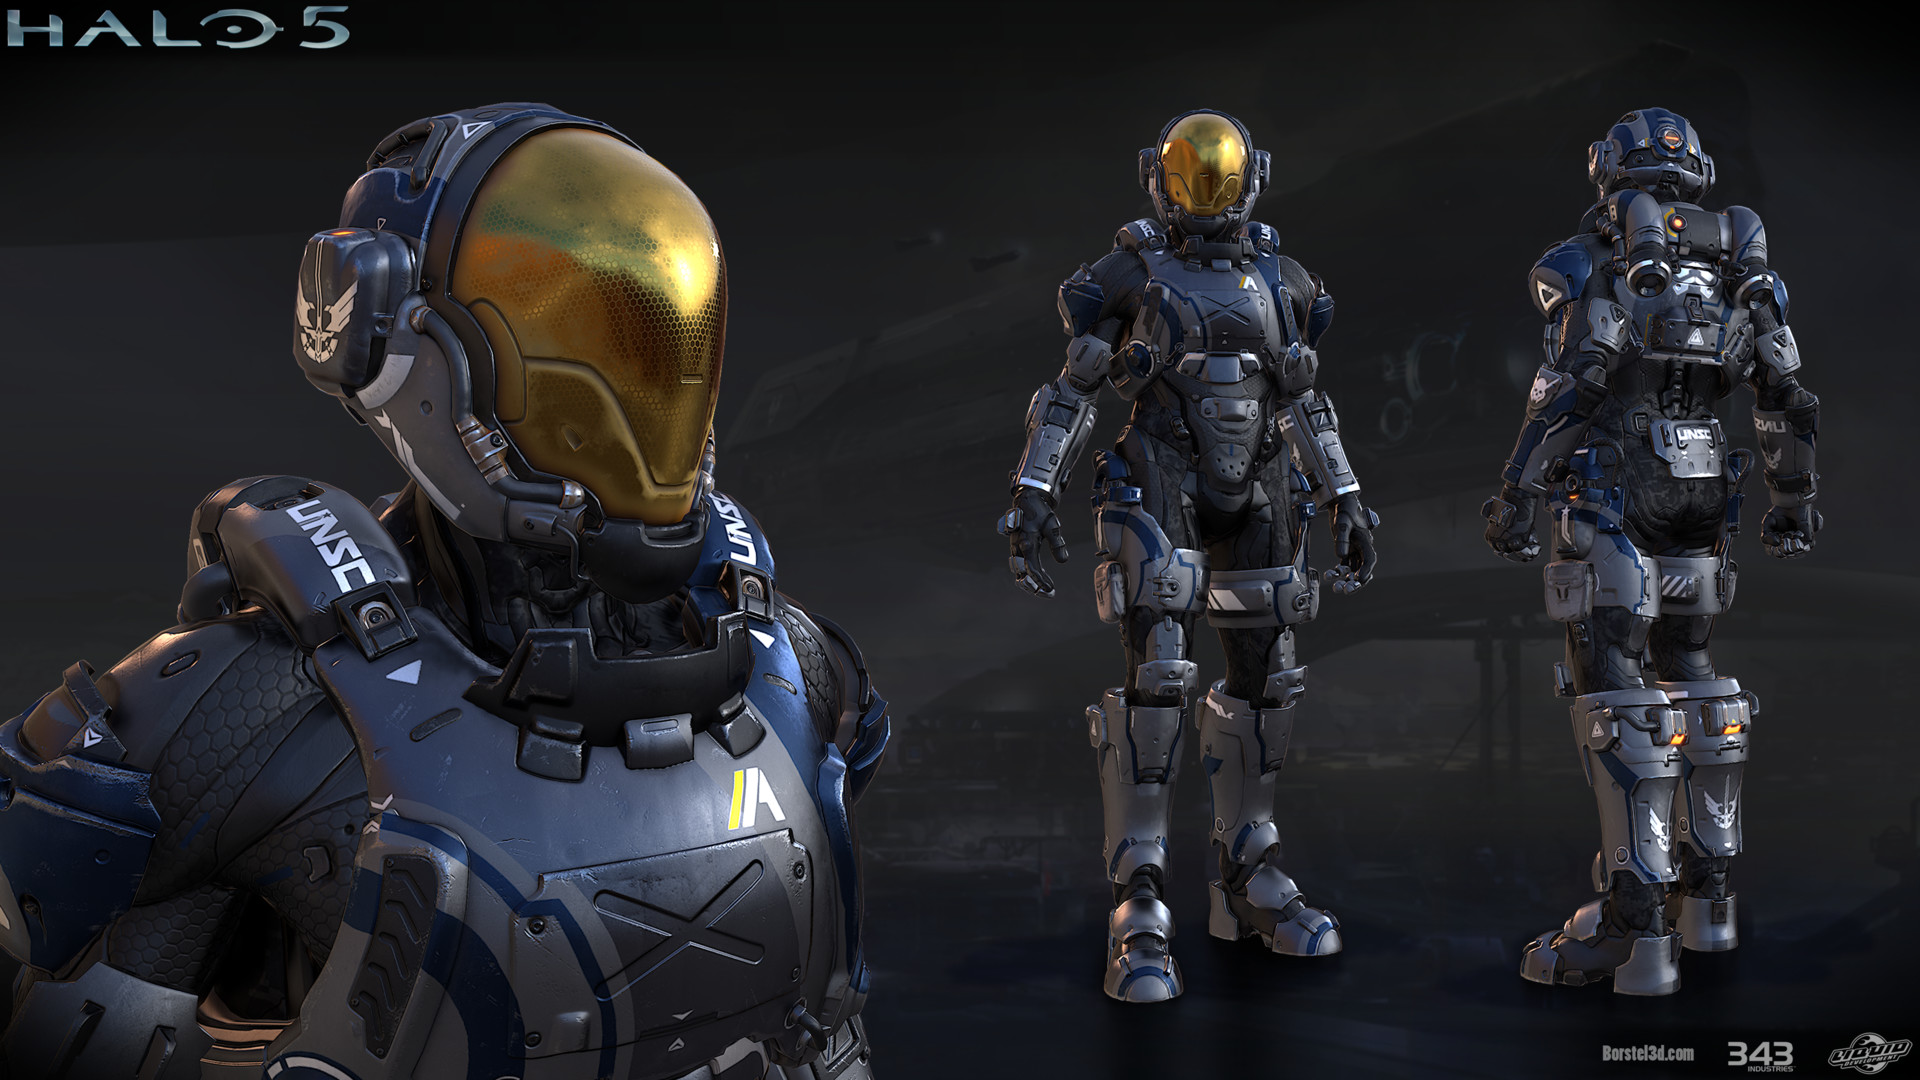 This is the Foehammer armor set that I made for Halo 5